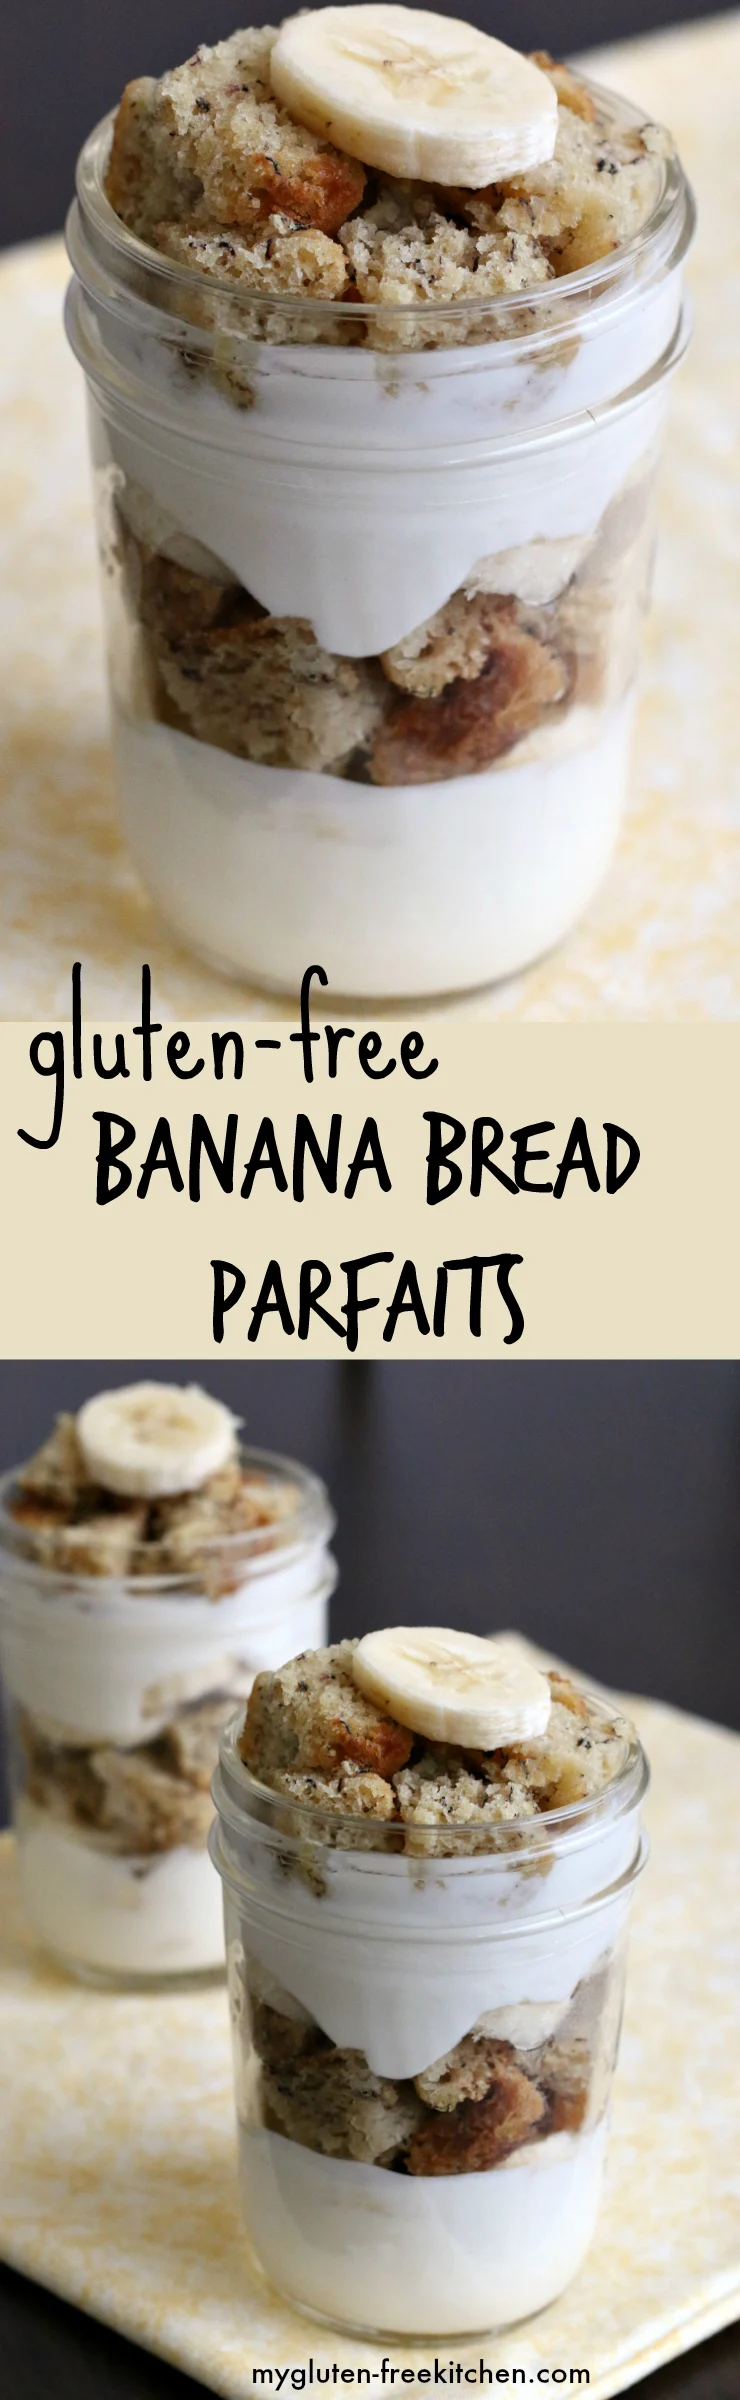 Gluten-free Banana Bread Yogurt Parfaits - This recipe got two thumbs up from everyone in the family!